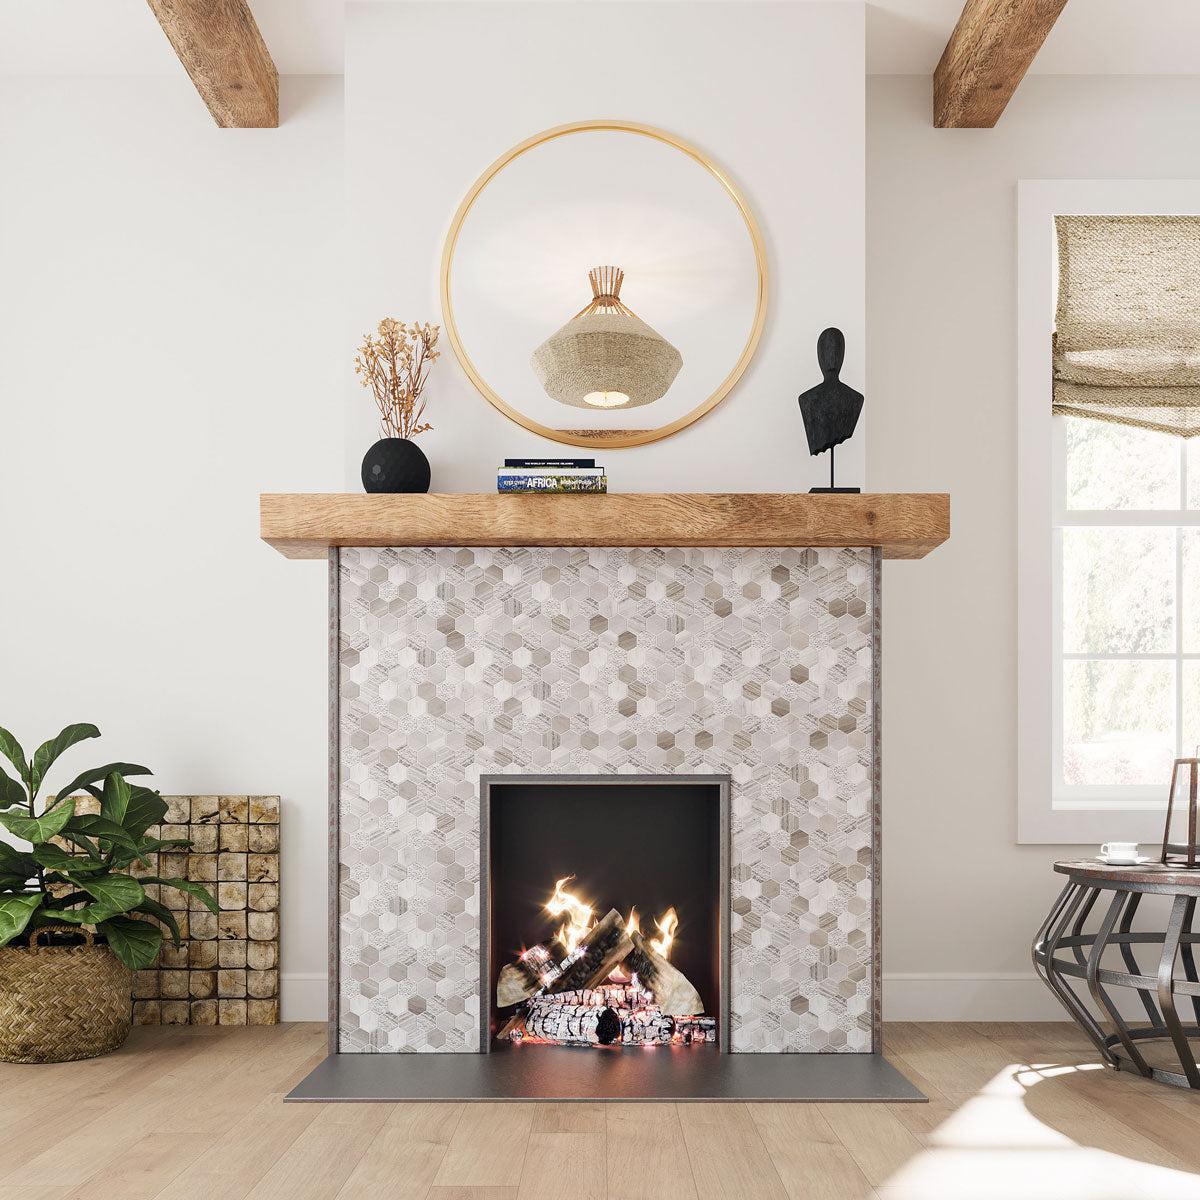 Rustic Modern Bohemian Living Room with Textured Wooden Beige Honeycomb Hexagon Marble Mosaic Tiled Fireplace Surround